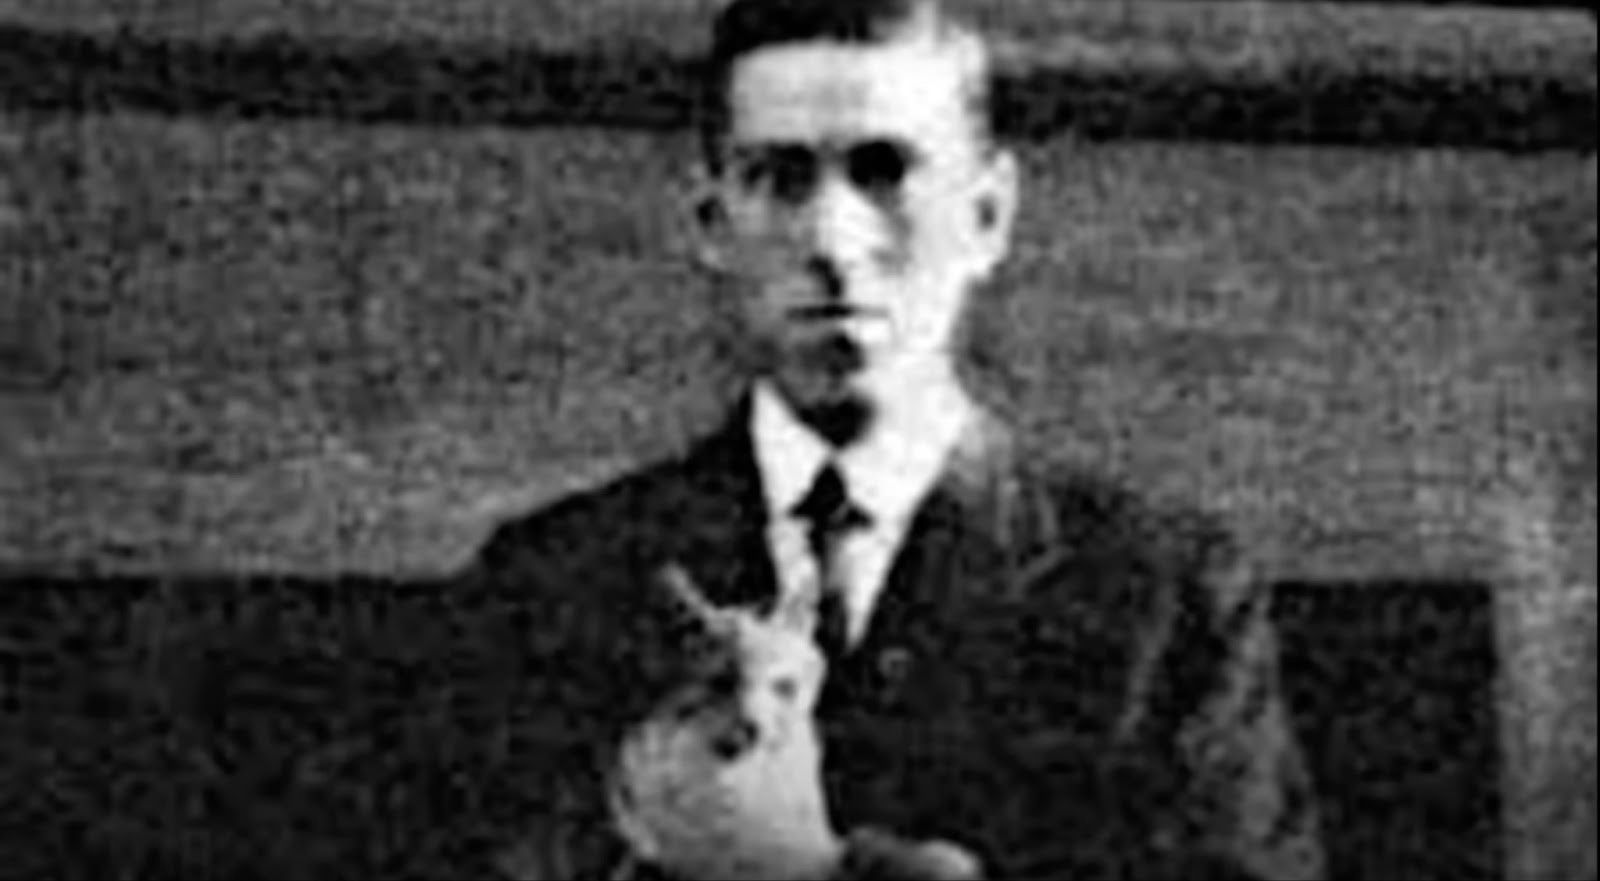 A man holds a cat in his hands